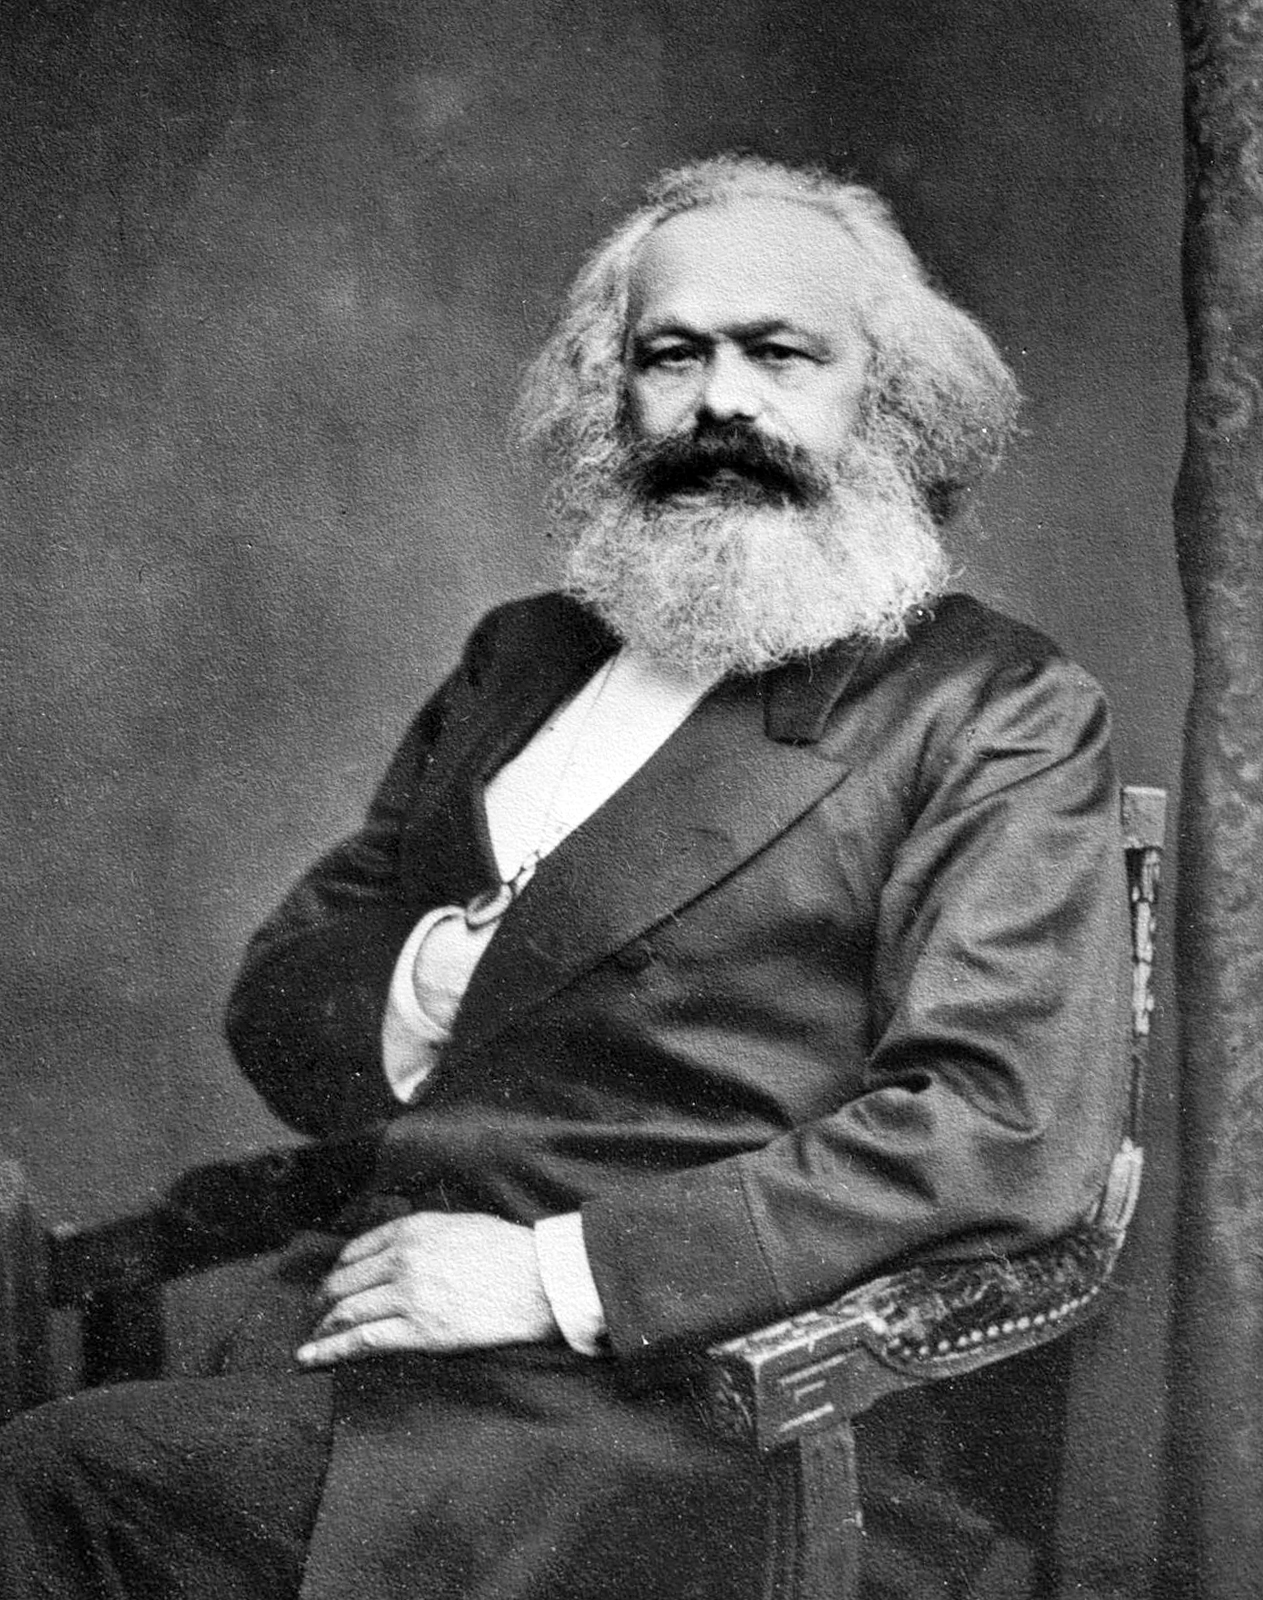 UNSPECIFIED - CIRCA 1865: Karl Marx (1818-1883), philosopher and German politician. (Photo by Roger Viollet Collection/Getty Images)